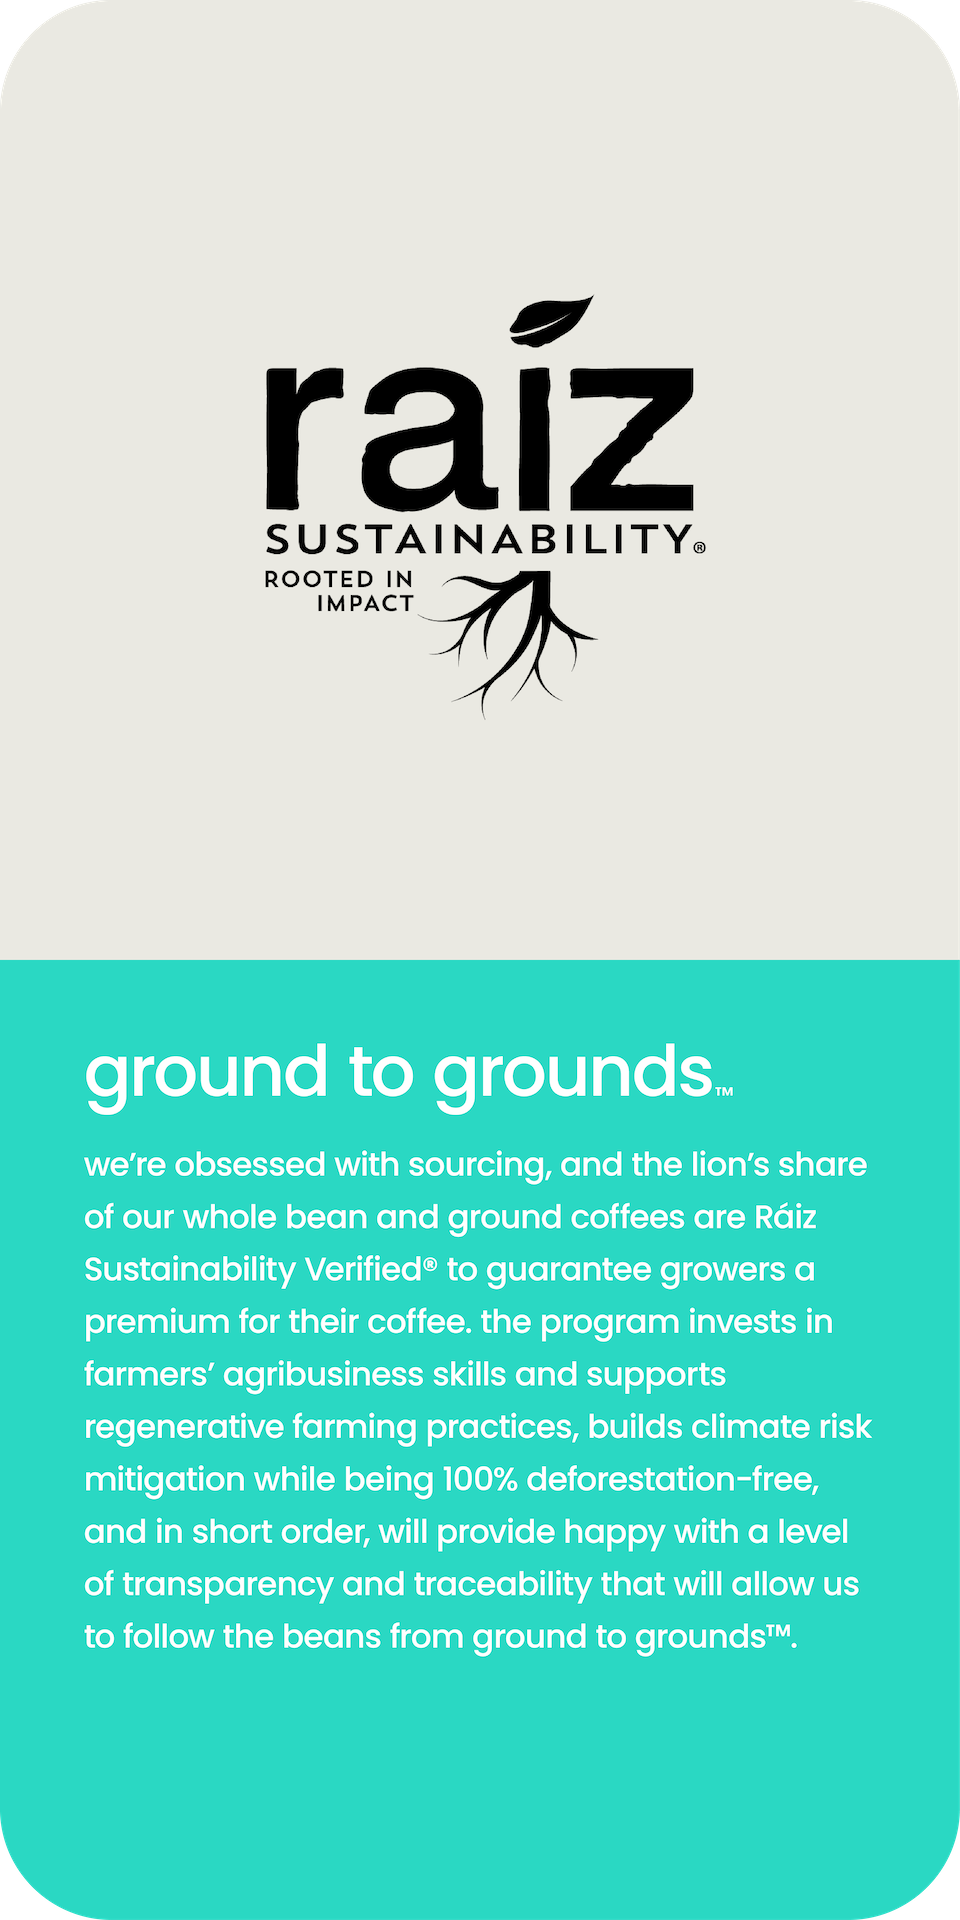 grounds to grounds™. We're obsessed with sourcing and the lions' share of our whole bean & ground are Raiz Sustainably Certified to guarantee growers a premium for their coffee. Other benefits are agribusiness skills, supports regenerative farming, climate risk mitigation, and deforestation free. 